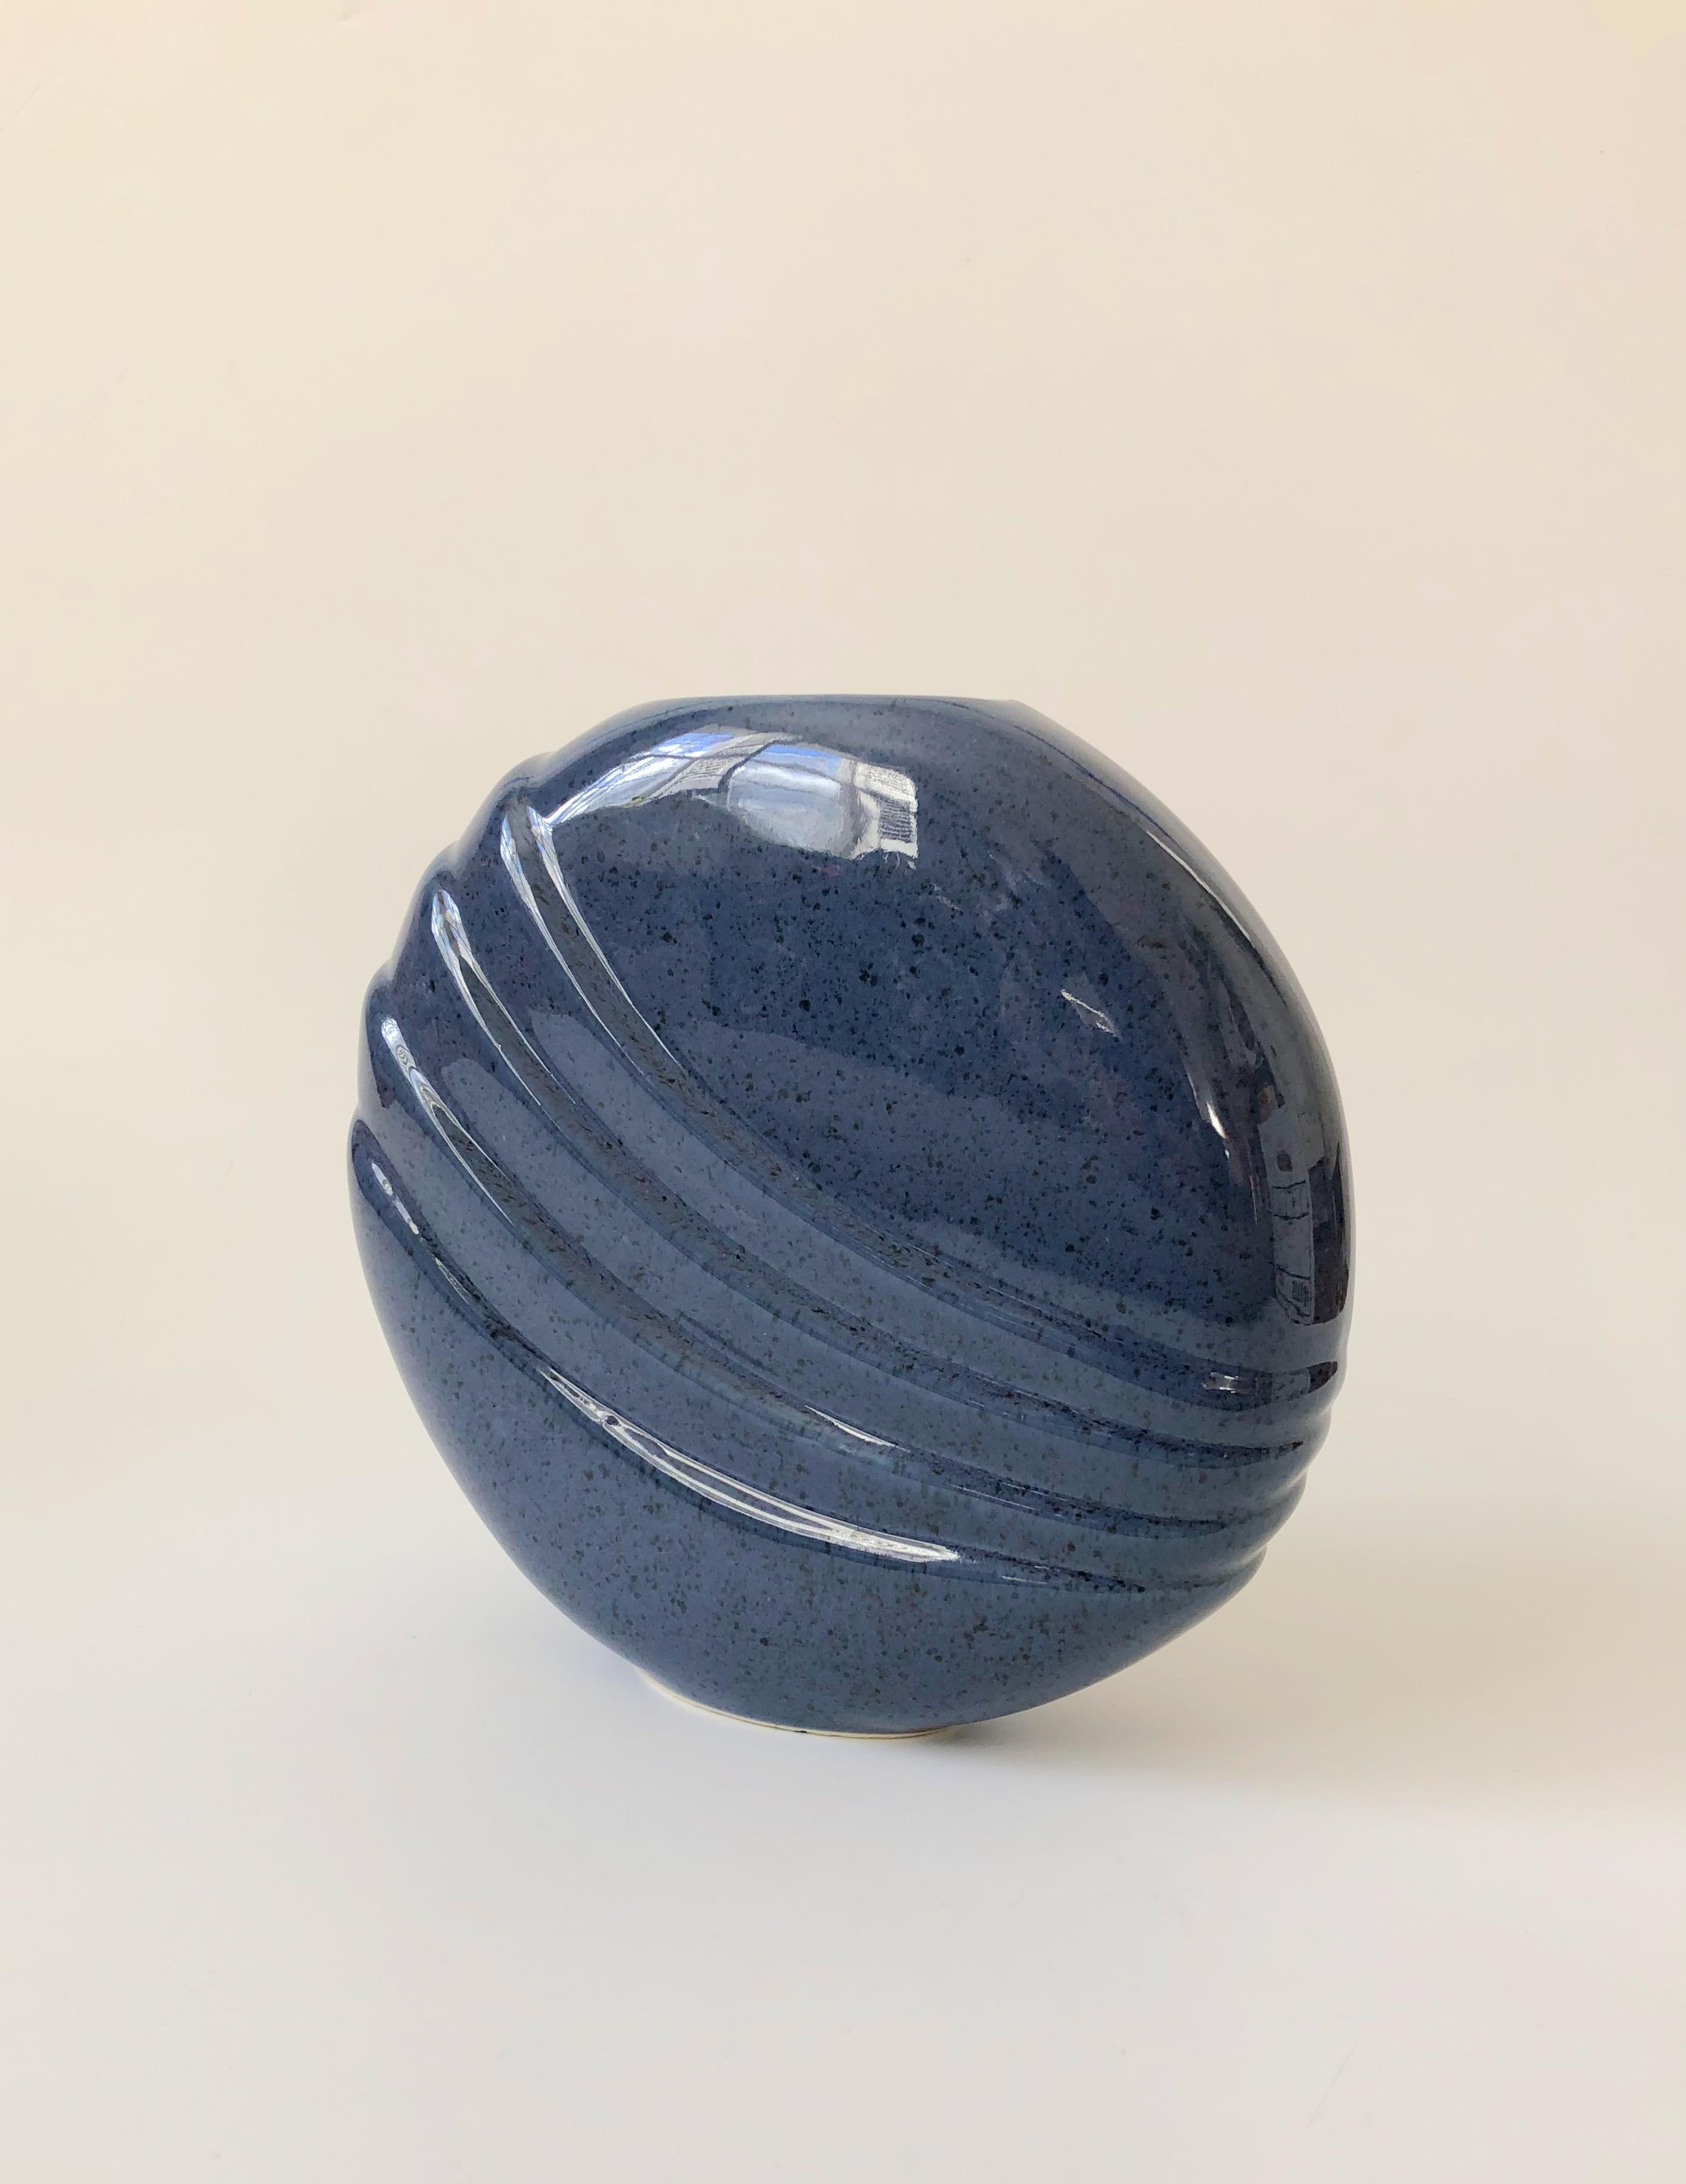 A wonderful vintage 80s modern ceramic vase. High gloss speckled blue glaze with a curved embossed design formed into the surface. A great sculptural piece with an unusual flat circular shape.
 